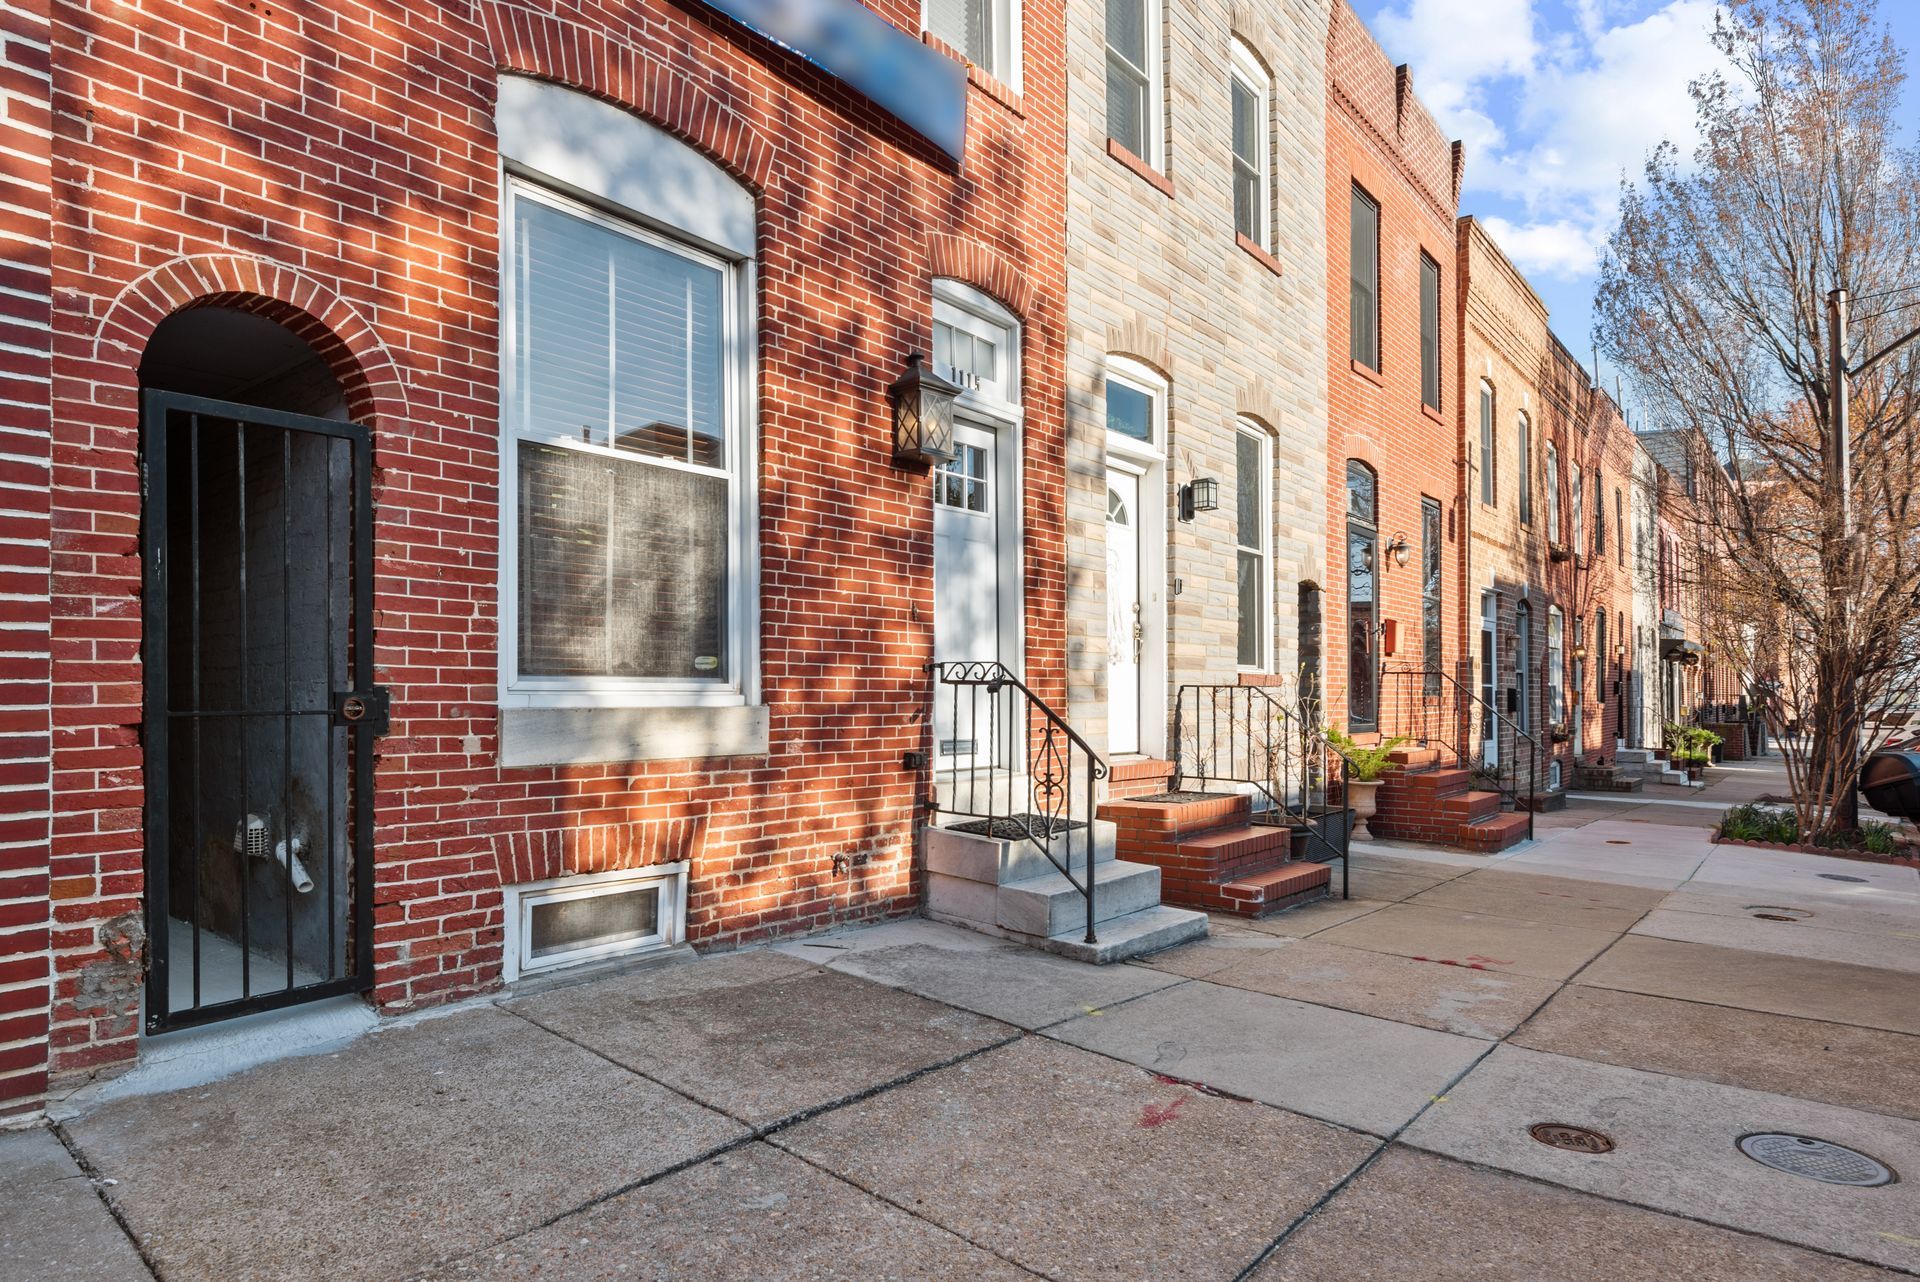 1115 S Clinton St. Baltimore, MD  - street view